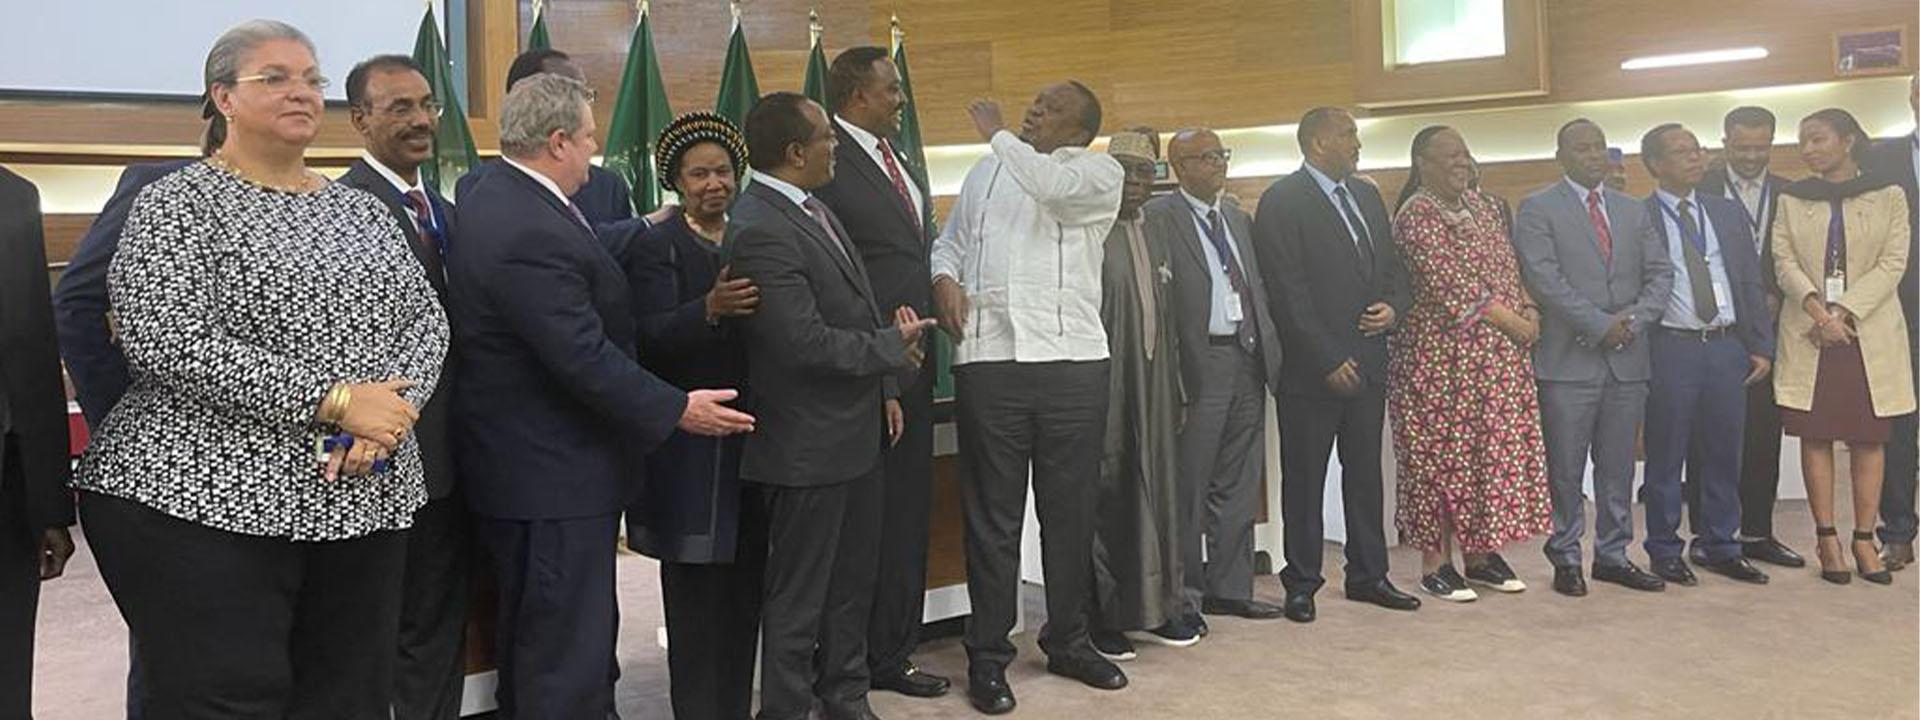 Ethiopia: IGAD Executive Secretary Congratulates Parties to the Conflict on the Signing of the Cessation of Hostilities Agreement